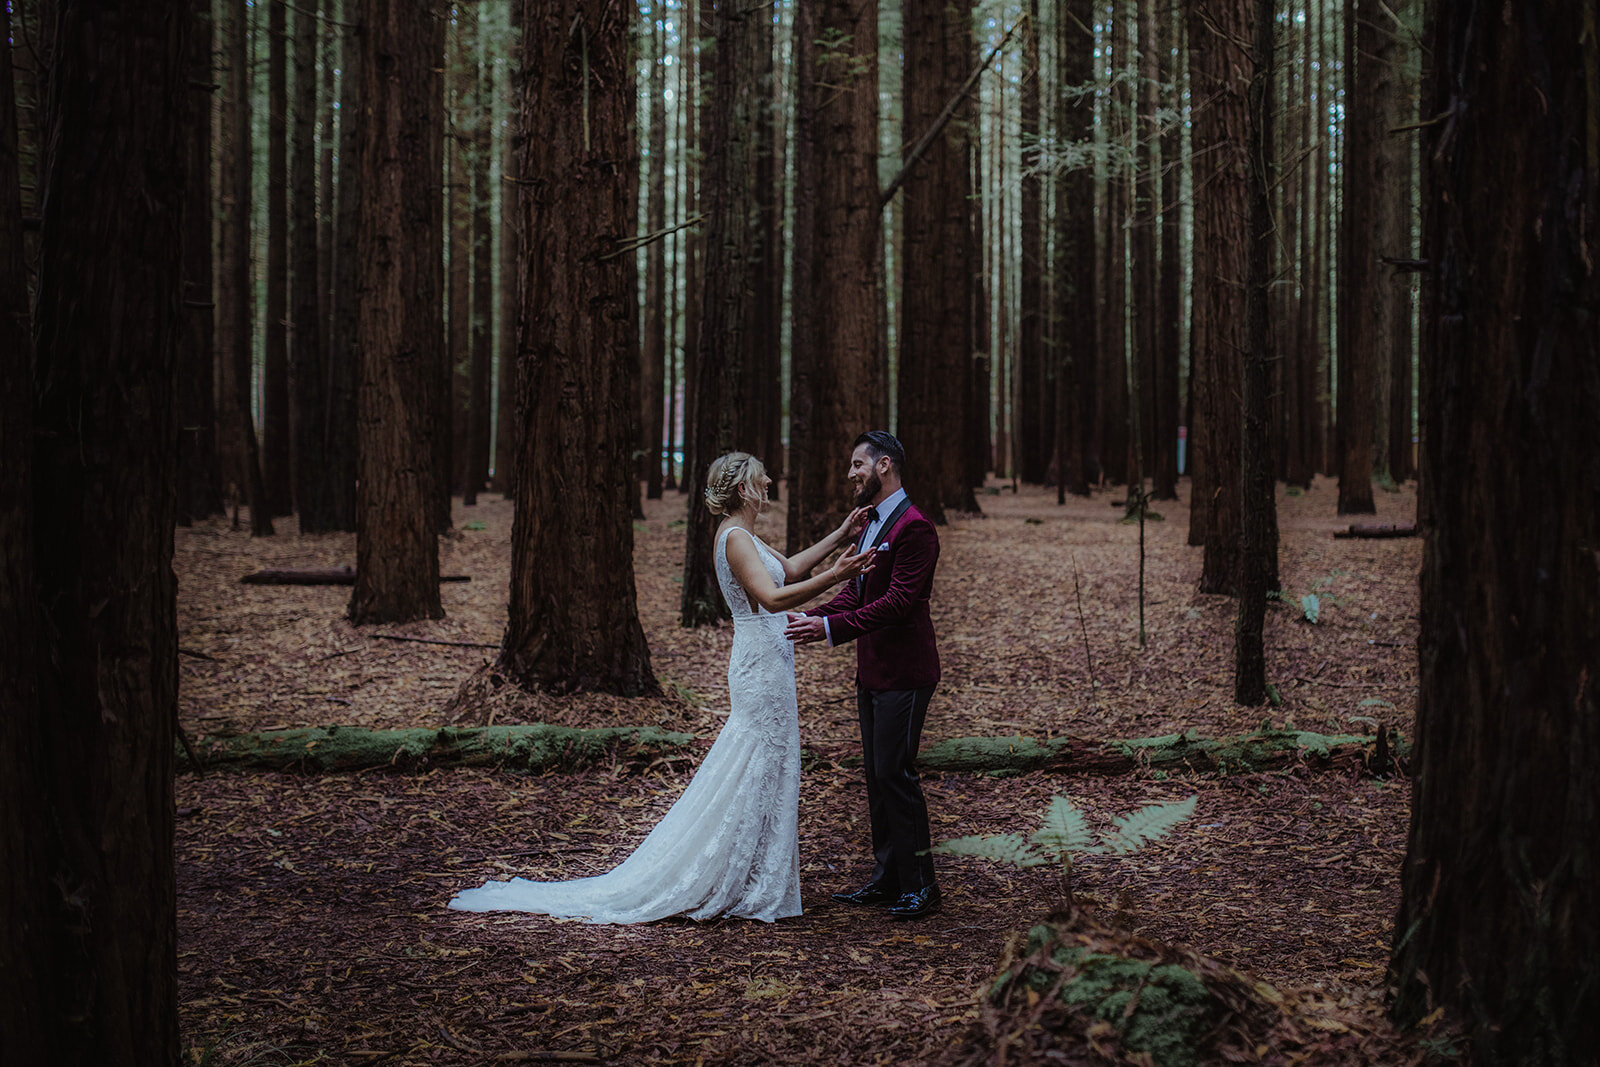 A bride and groom's first look photograph at their wedding